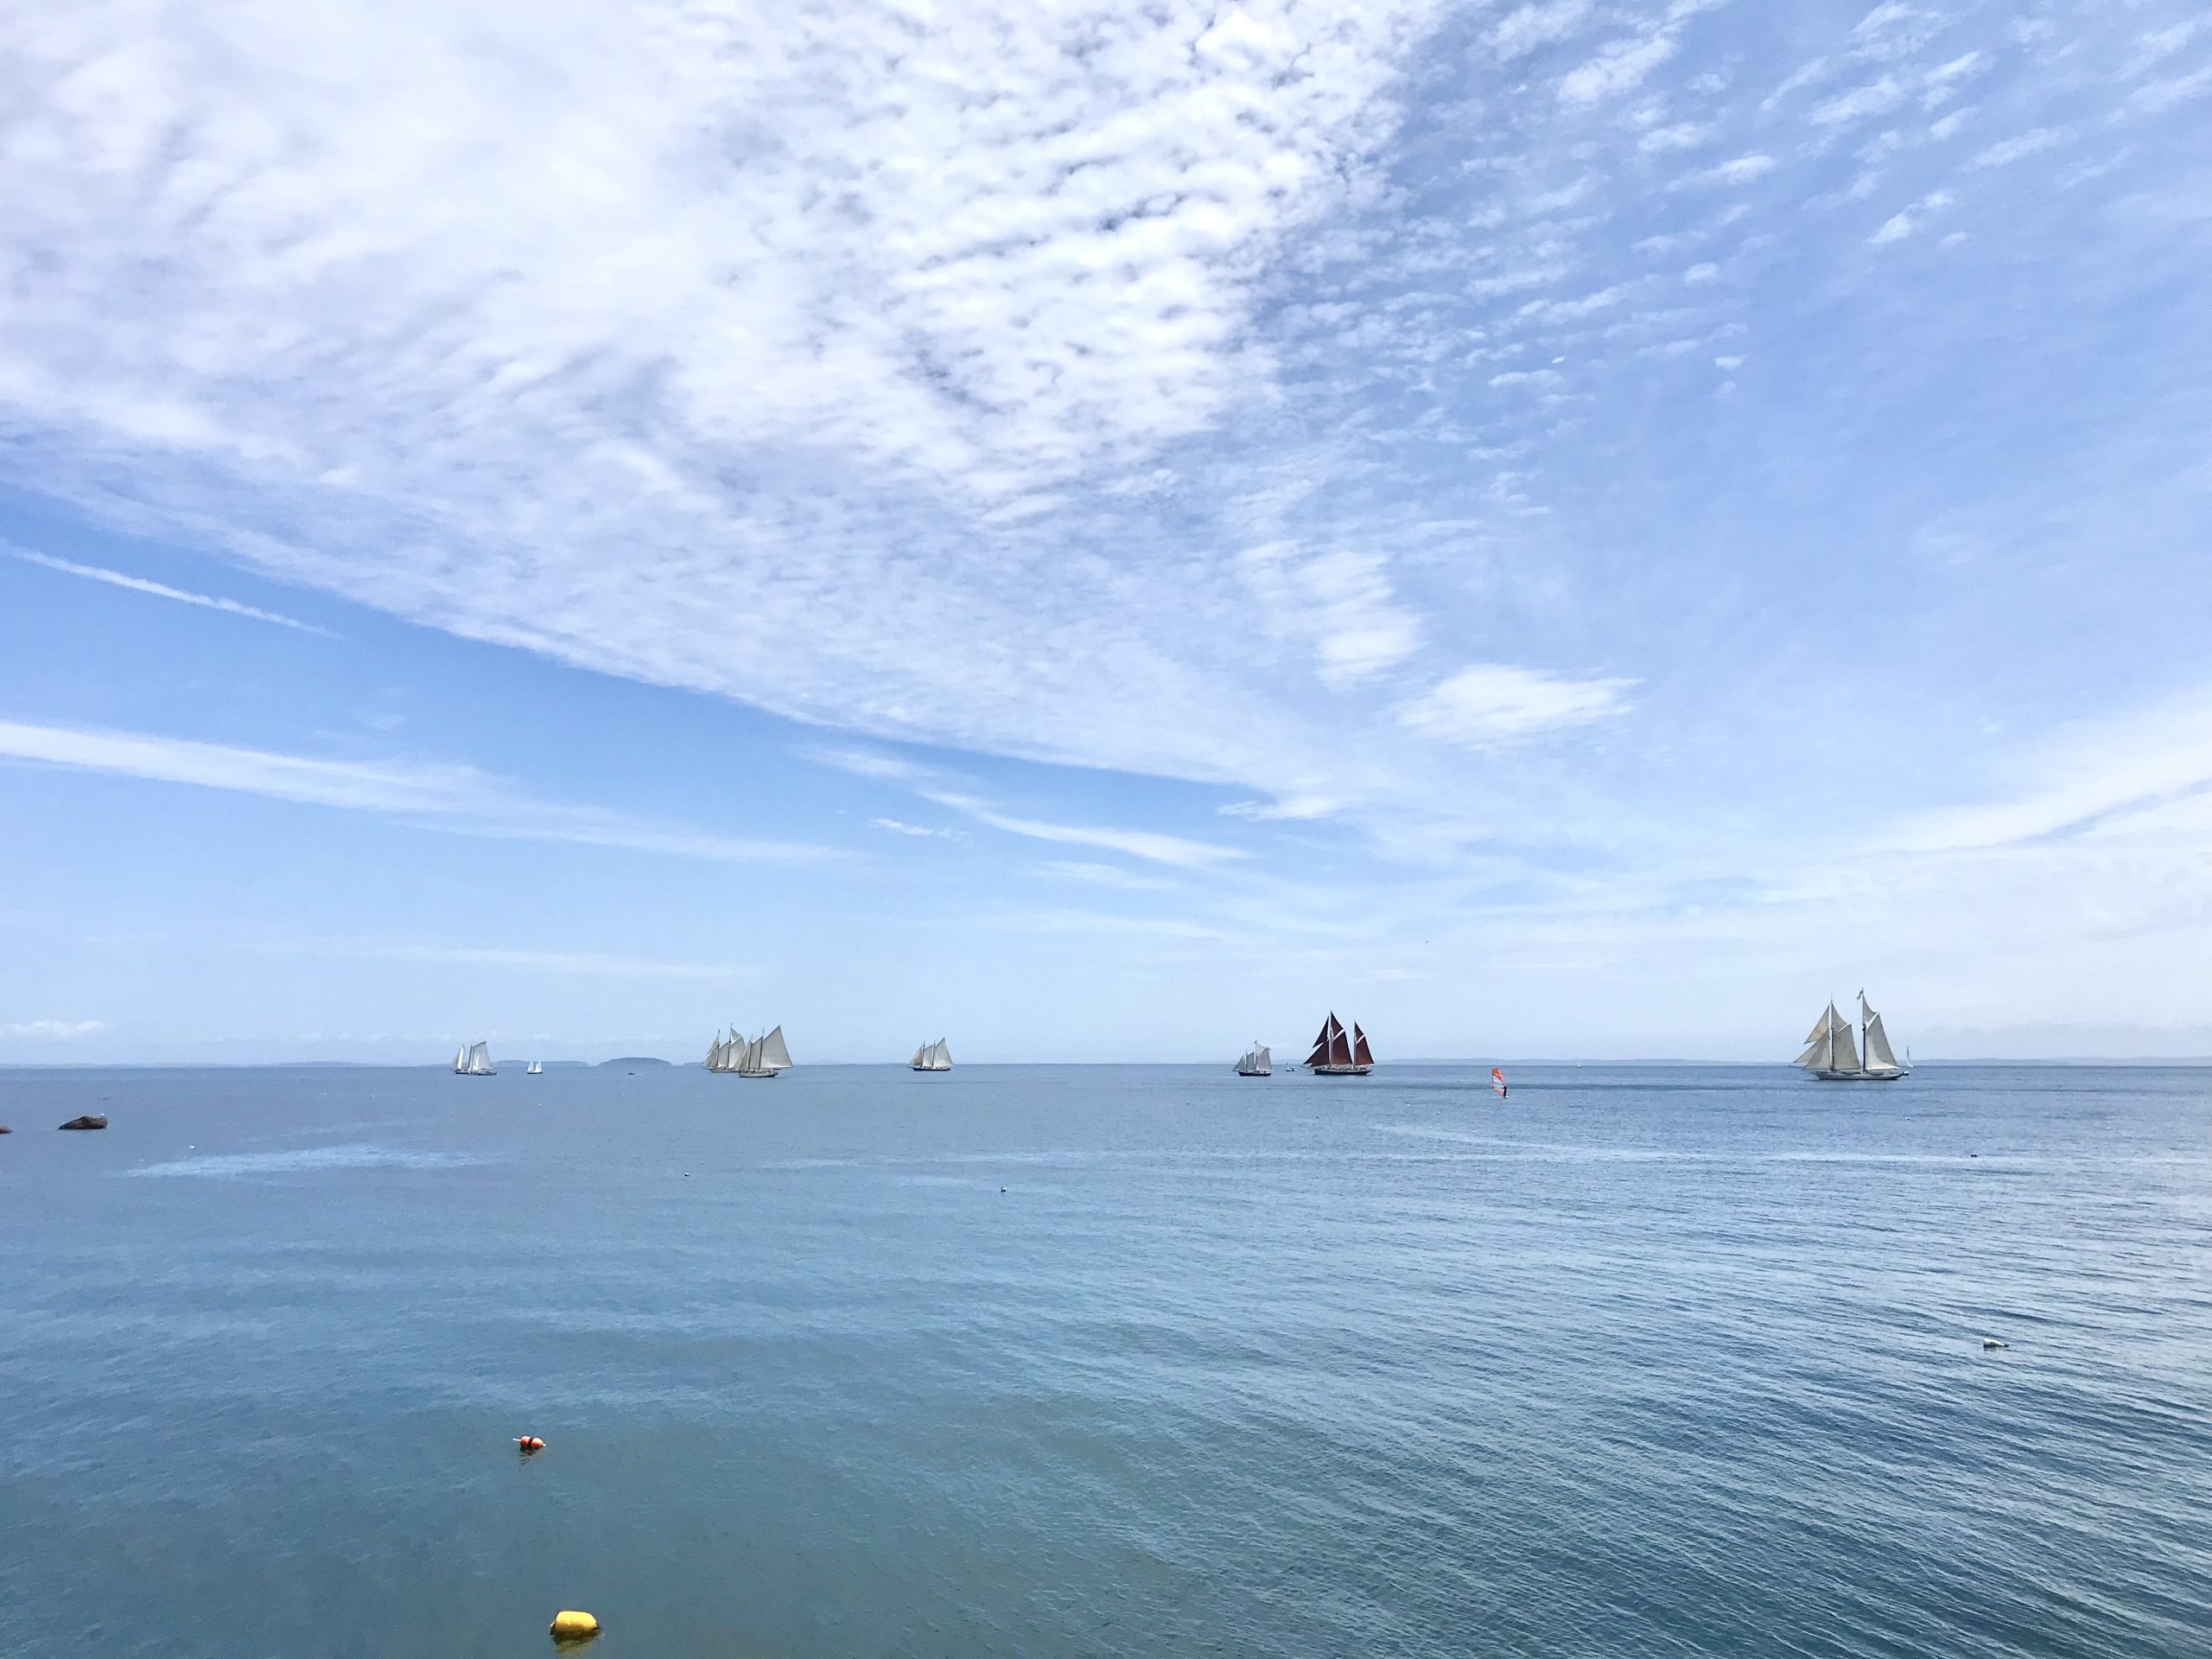 The 45th Annual Great Schooner Race